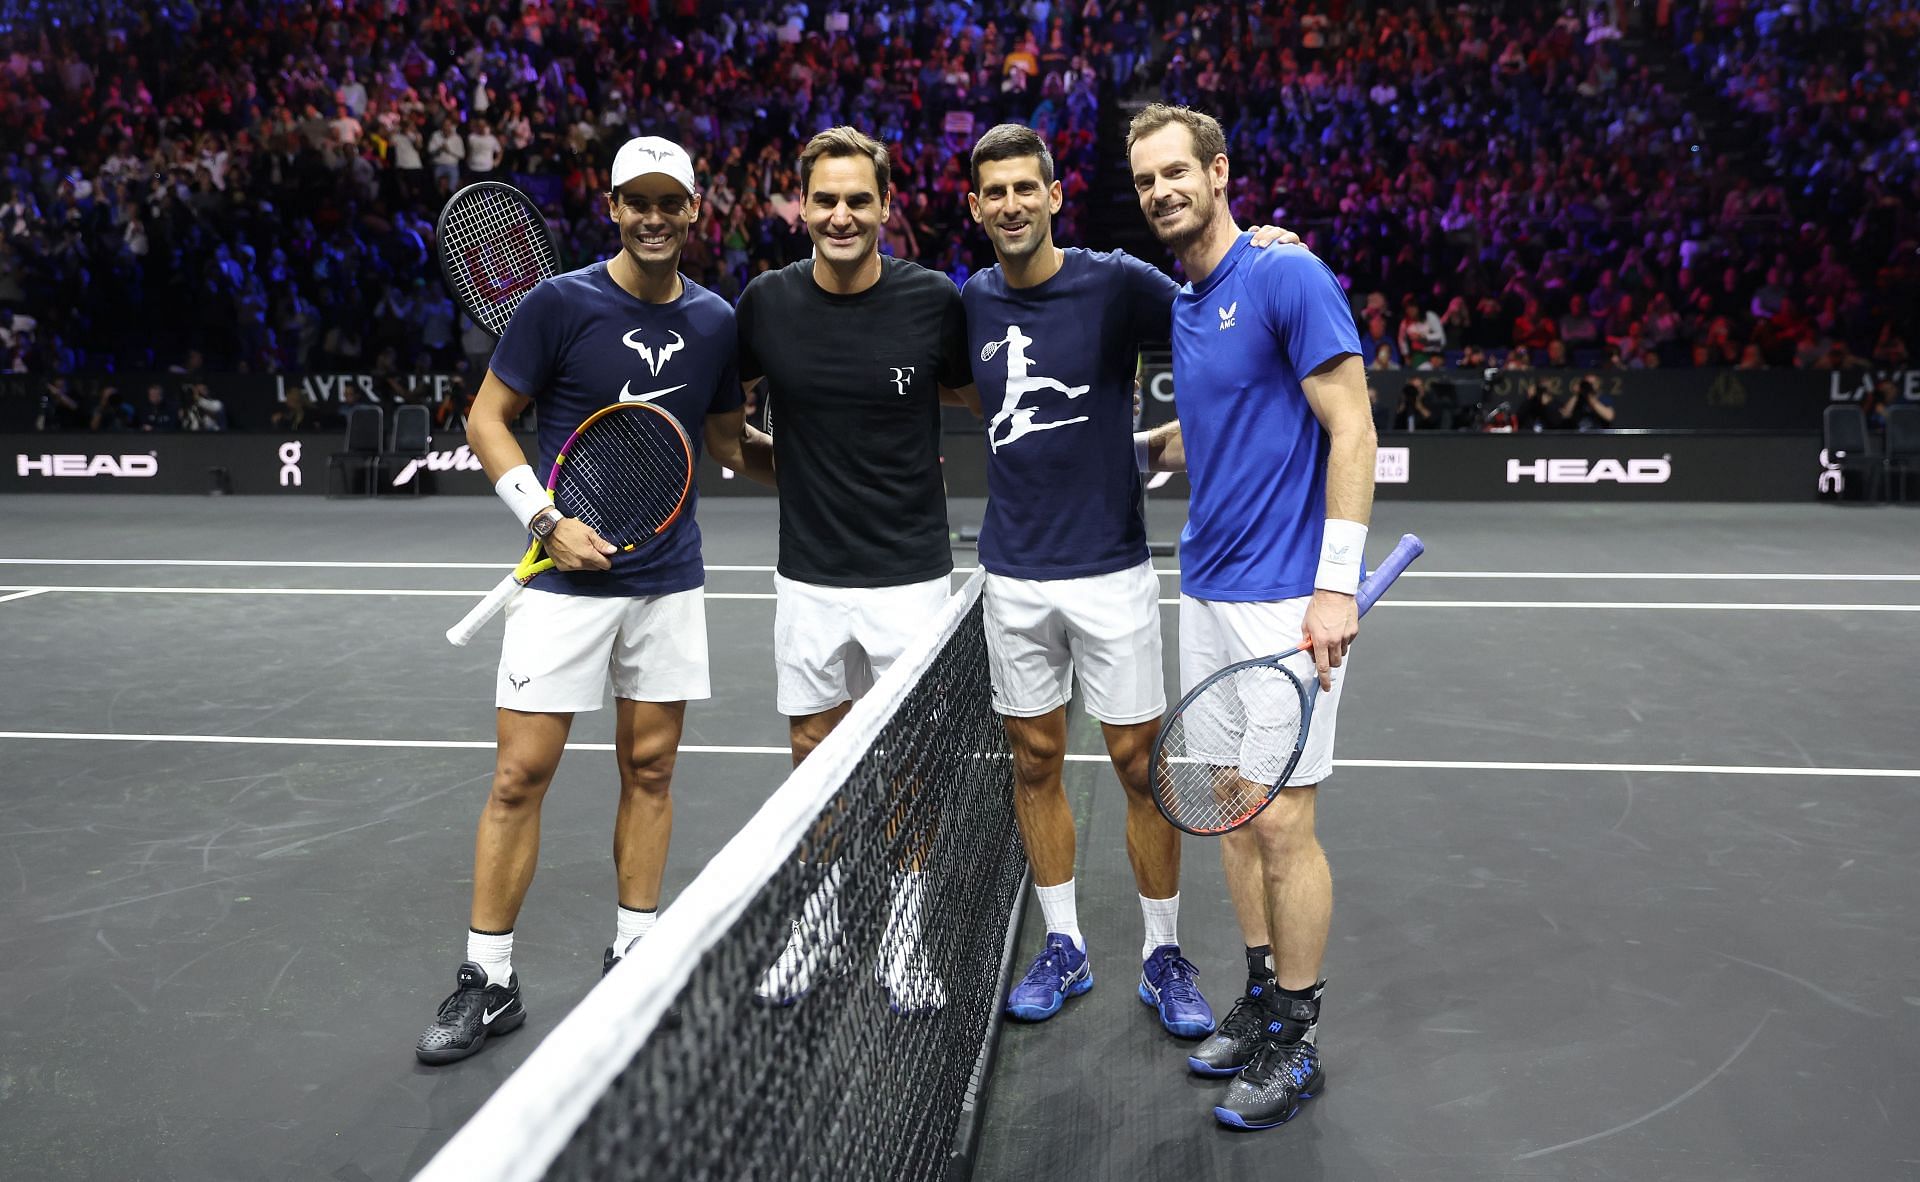 (From L to R): Rafael Nadal, Roger Federer, Novak Djokovic, and Andy Murray